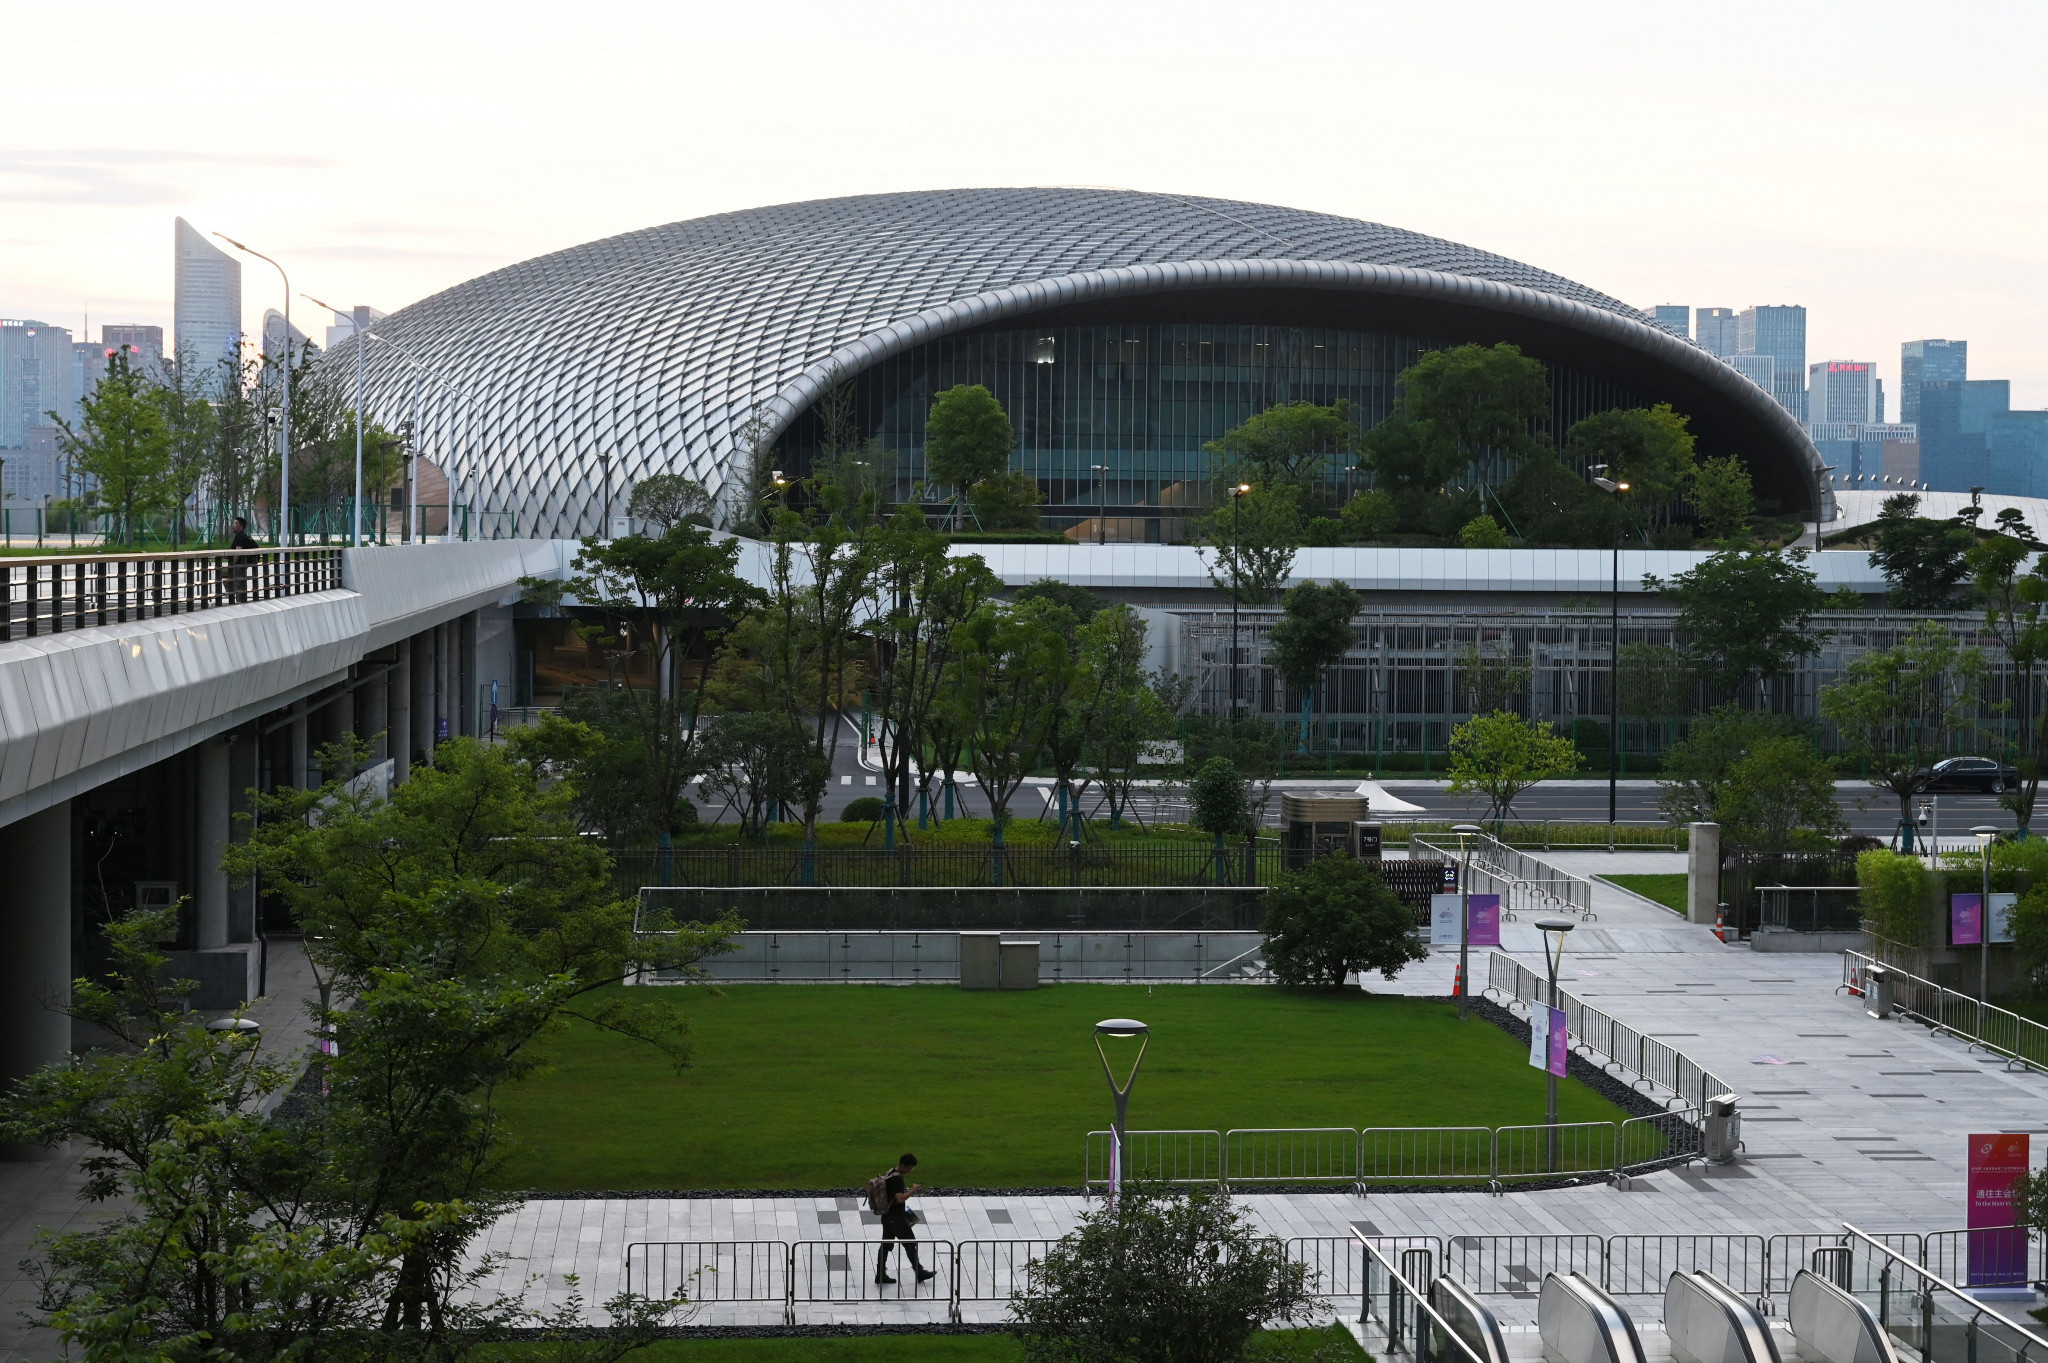 Russians and Belarusians to not compete at Hangzhou 2022 Asian Games as IOC says plan is "not feasible"